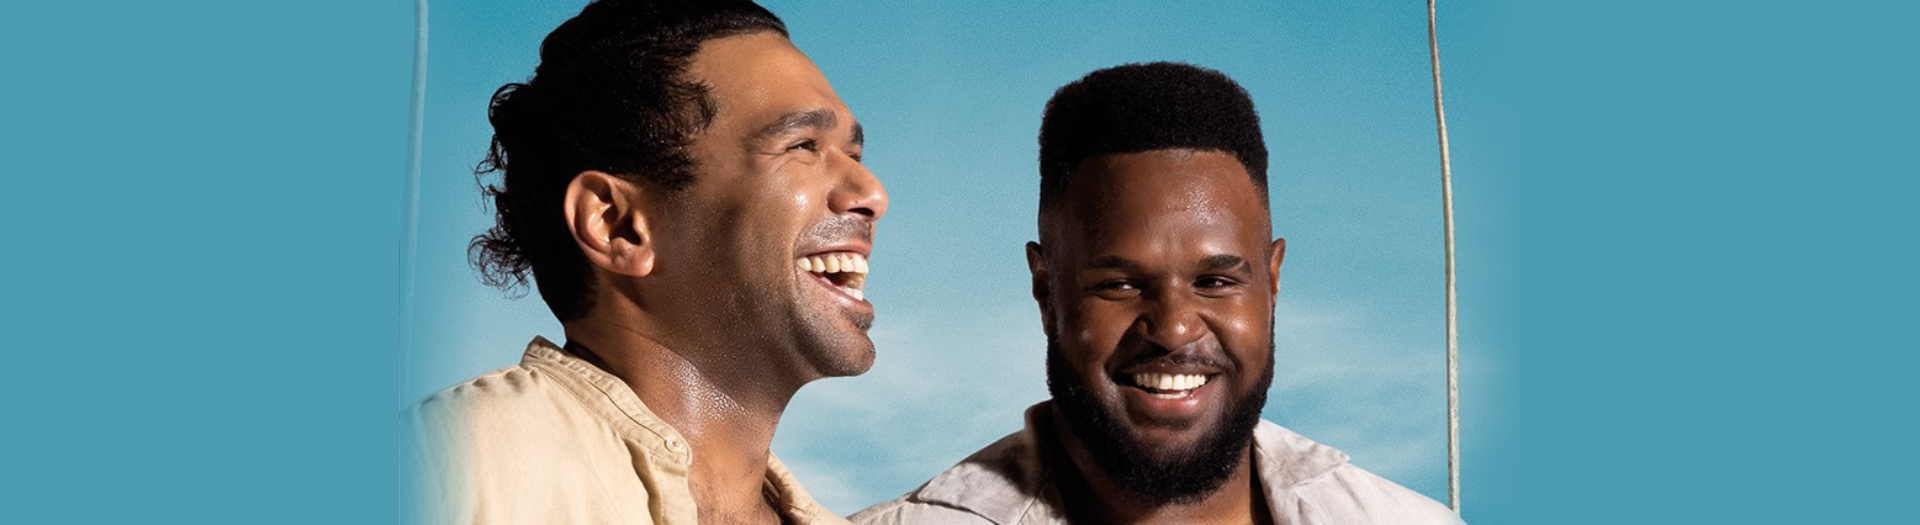 Two men smiling and laughing in front of a blue sky and palm tree.